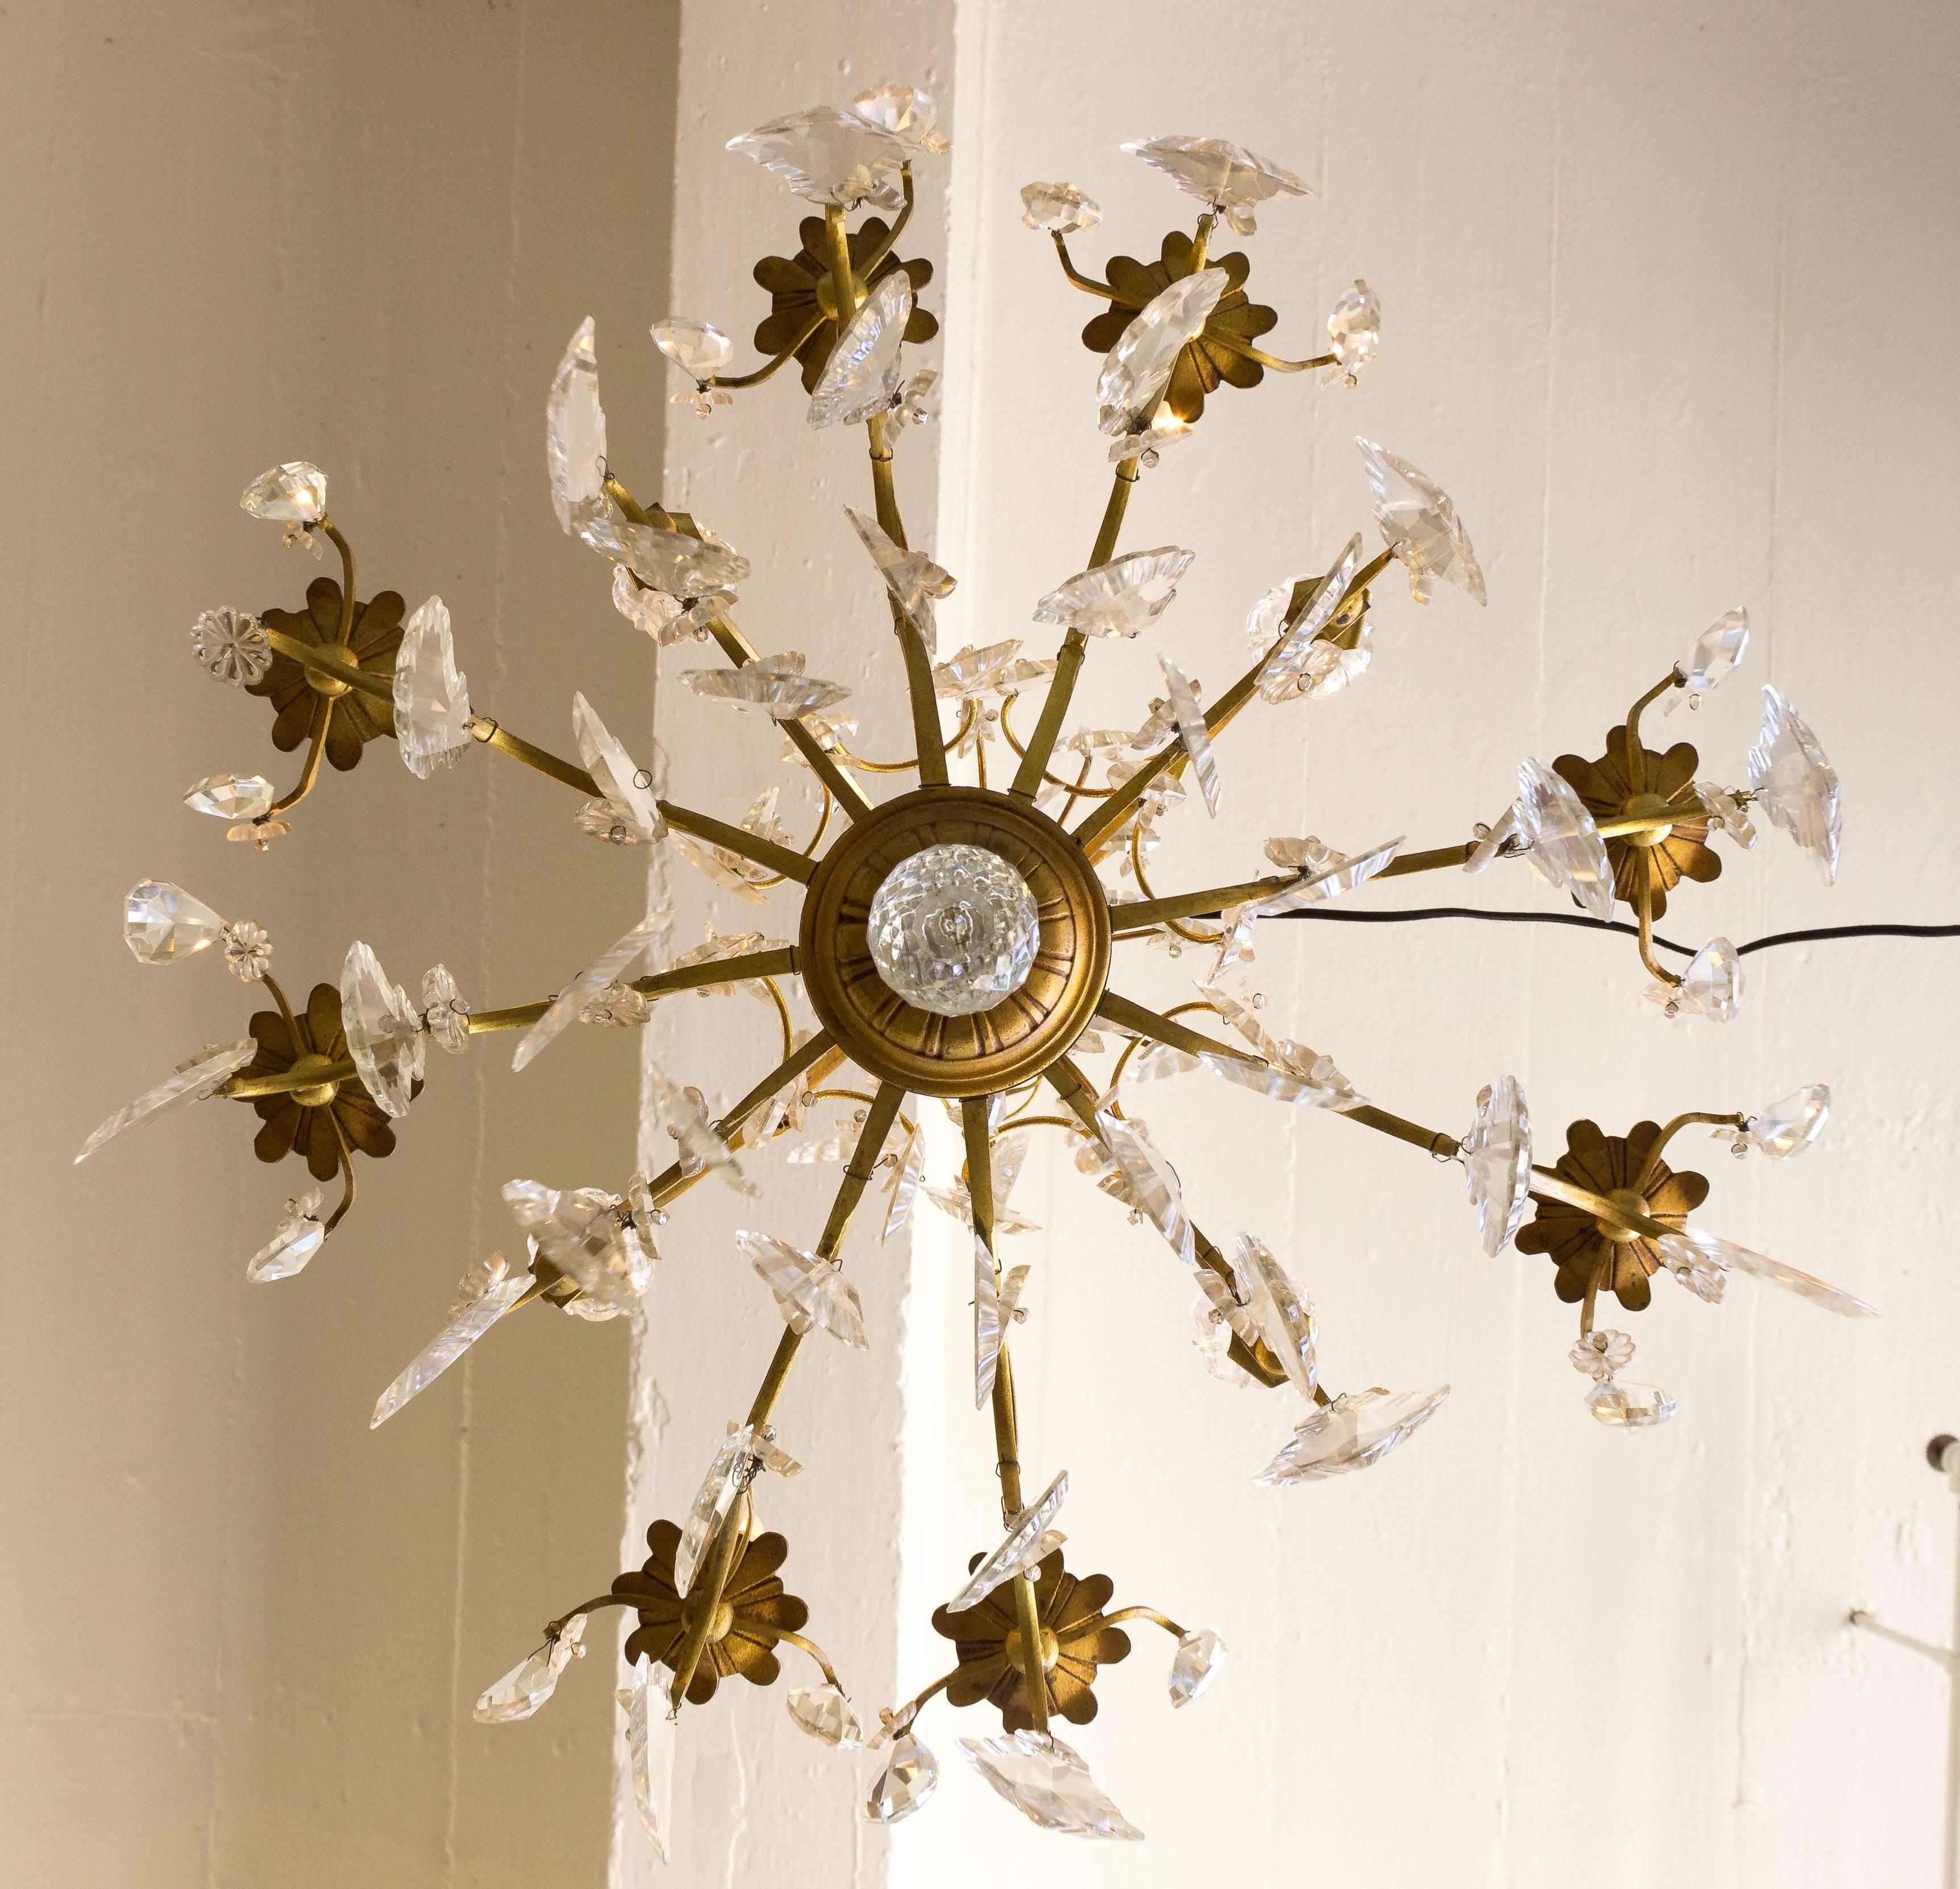 Presenting an elegant French 1920s gilt iron ten armed chandelier, this exquisite lighting fixture exudes sophistication and charm. Adorned with cut crystals, this stunning piece showcases the timeless beauty of the Art Deco era. Recently rewired,